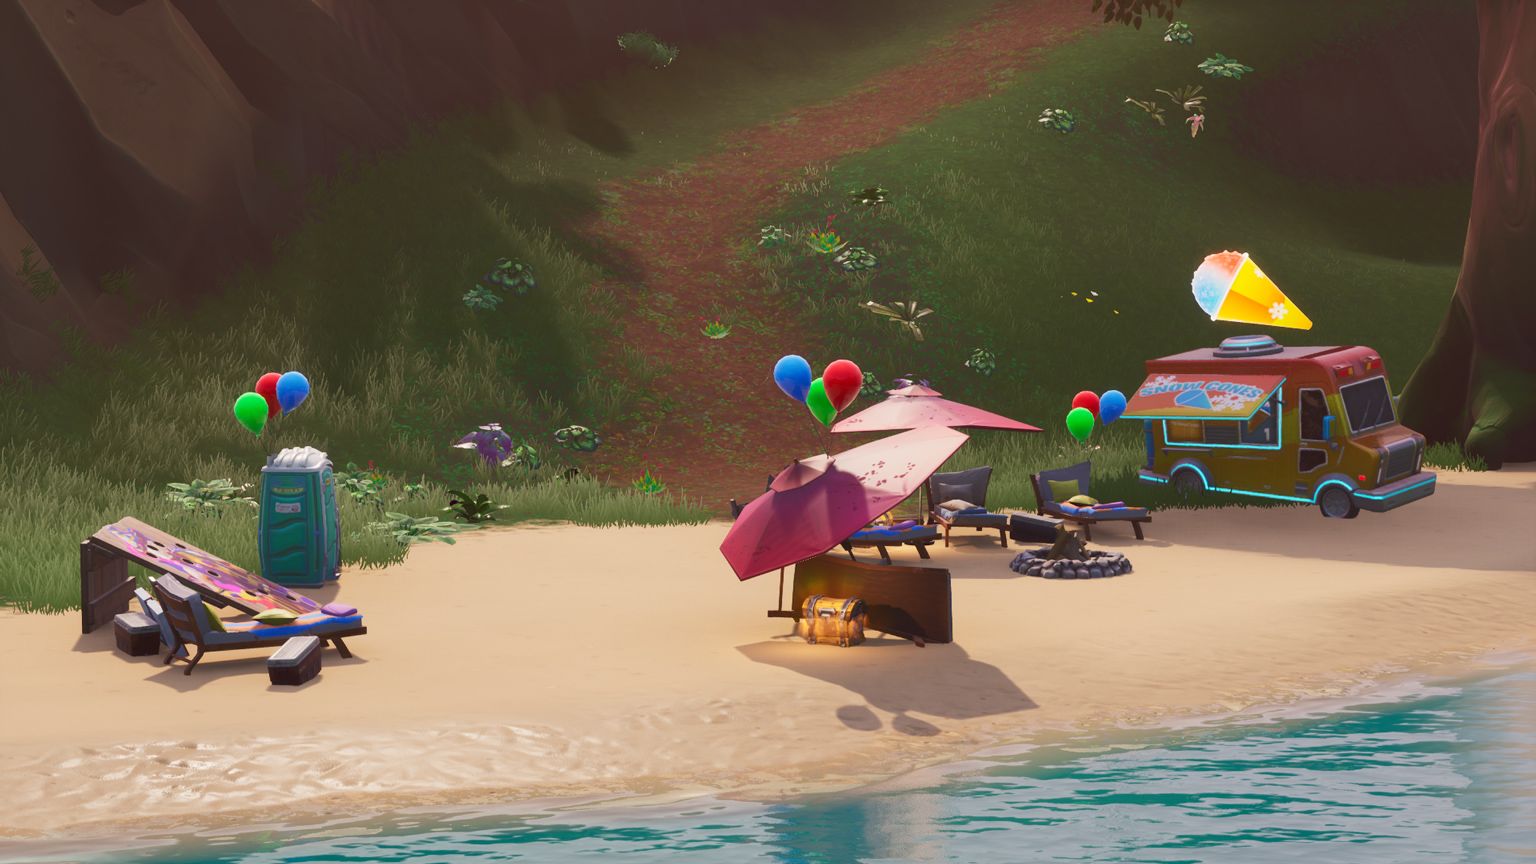 fortnite 14 days of summer dance at different beach parties location guide - fortnite dance at different beach parties locations